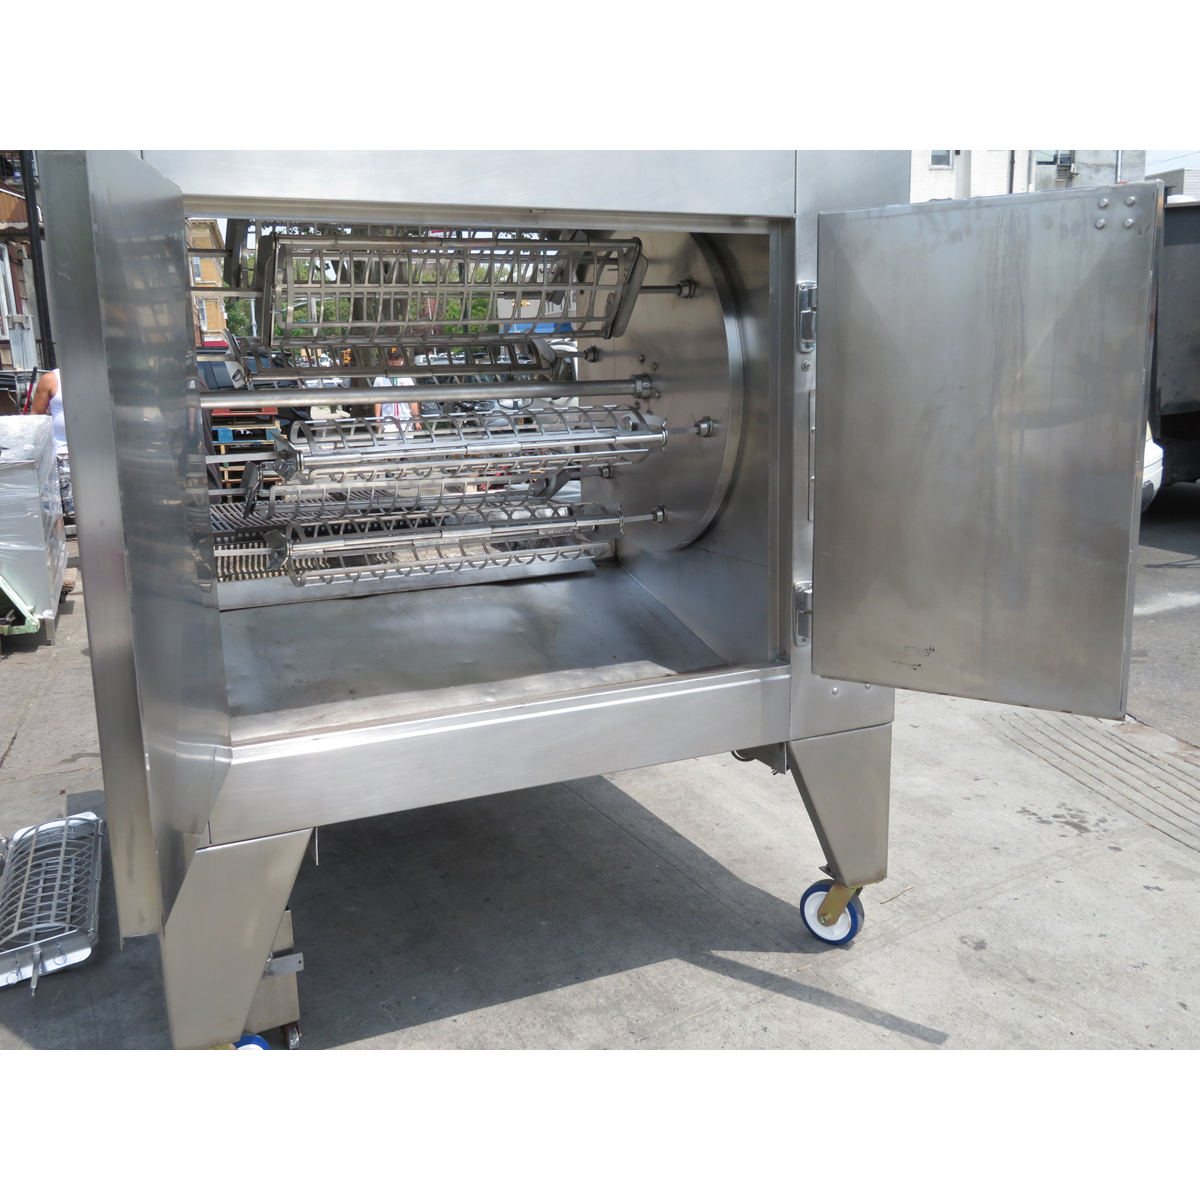 Woodstone MT. OLYMPUS WS-SFR-6-SB Stone Fired Rotisserie on Wheels with Cooking Grill, Used Excellent Condition image 8